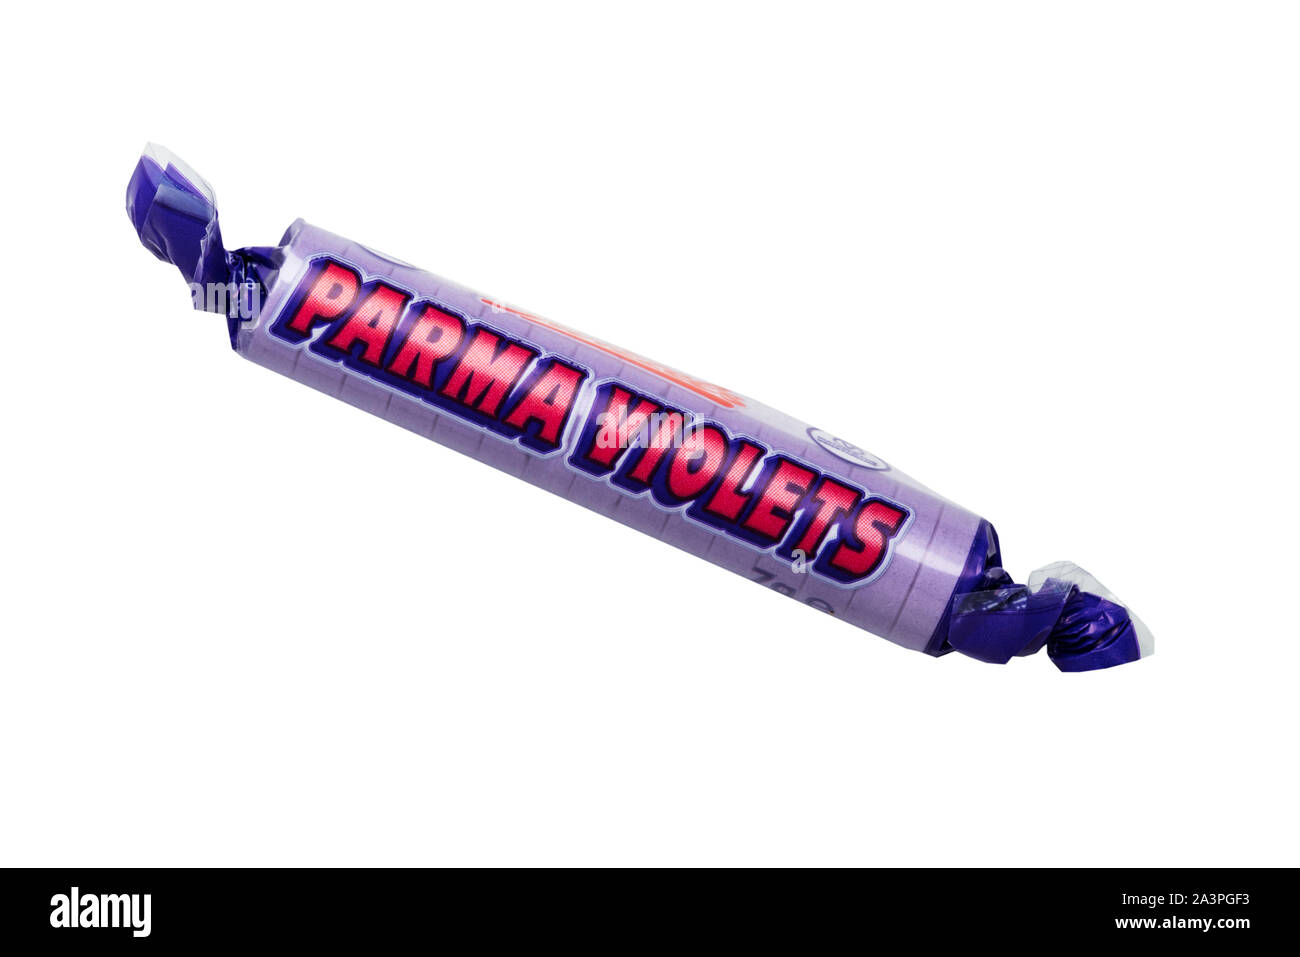 A packet of Parma Violets sweets on a white background Stock Photo